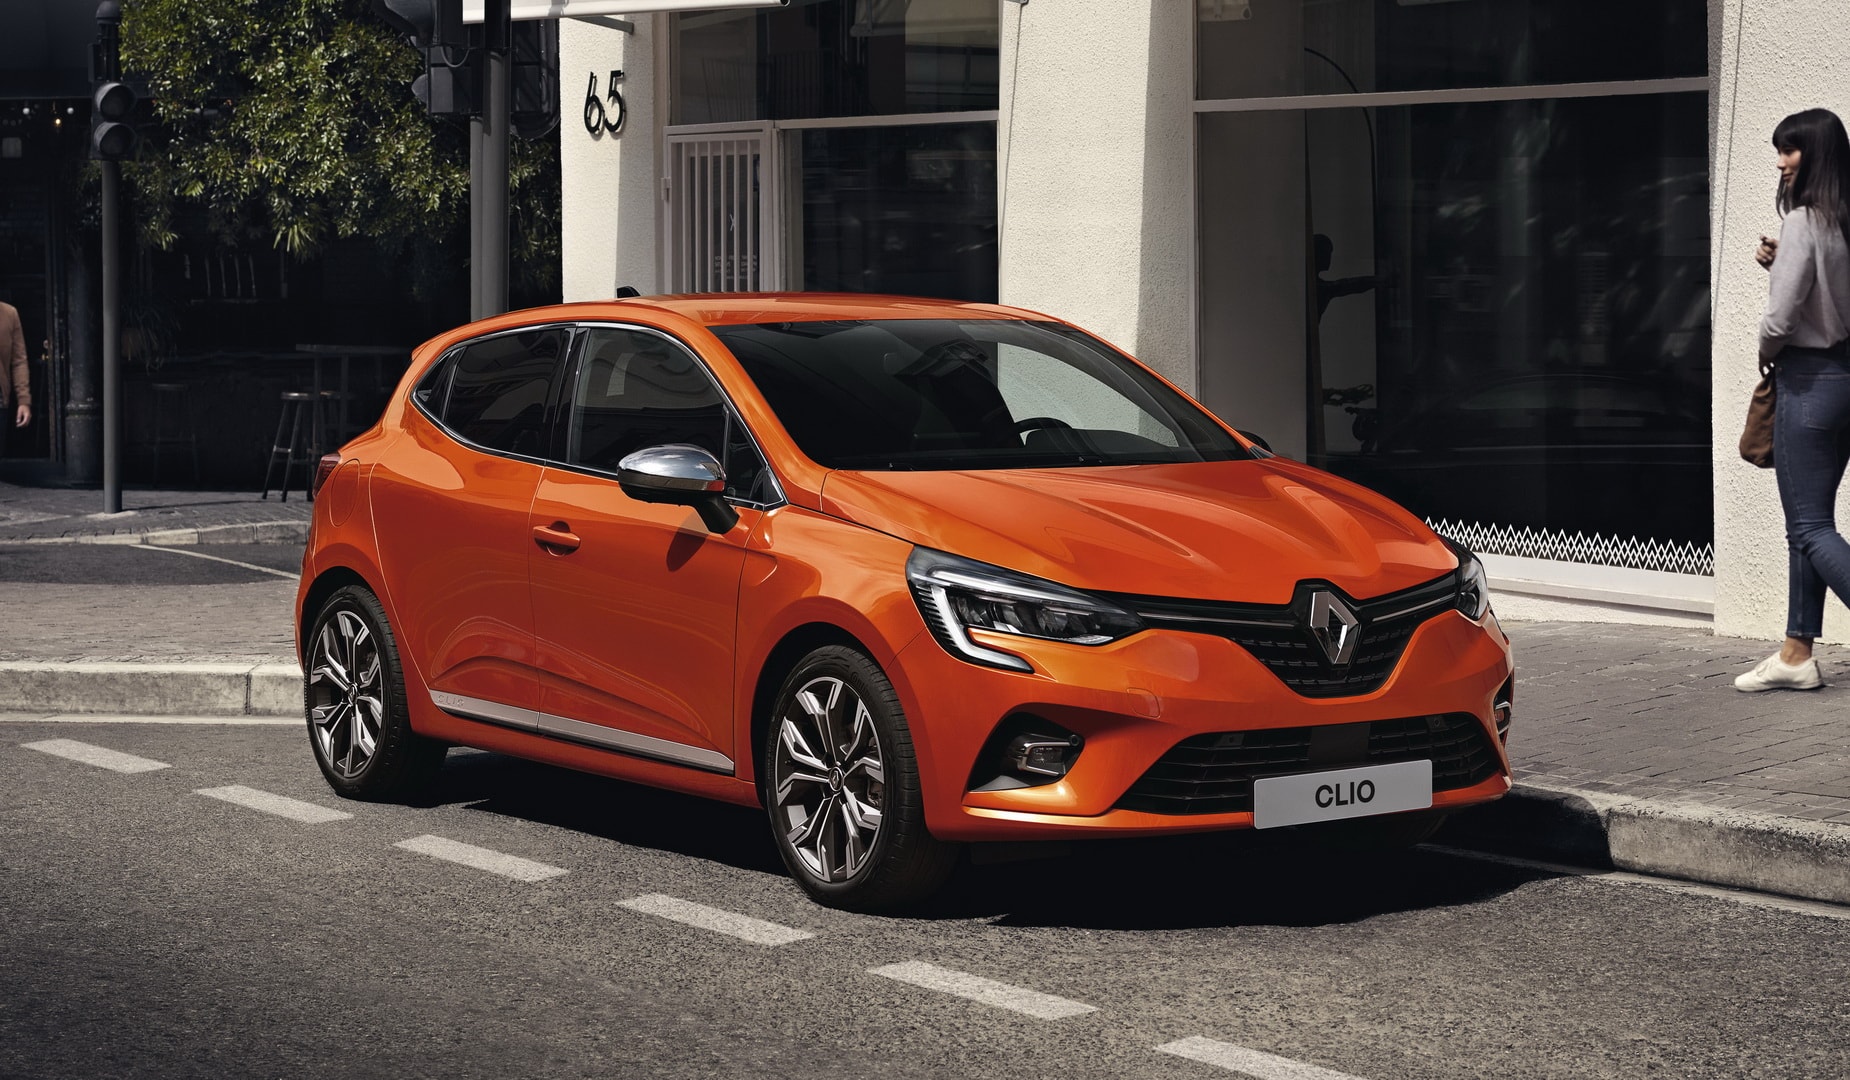 Revised Renault and Captur Ranges Now Offering Across the Board autoevolution